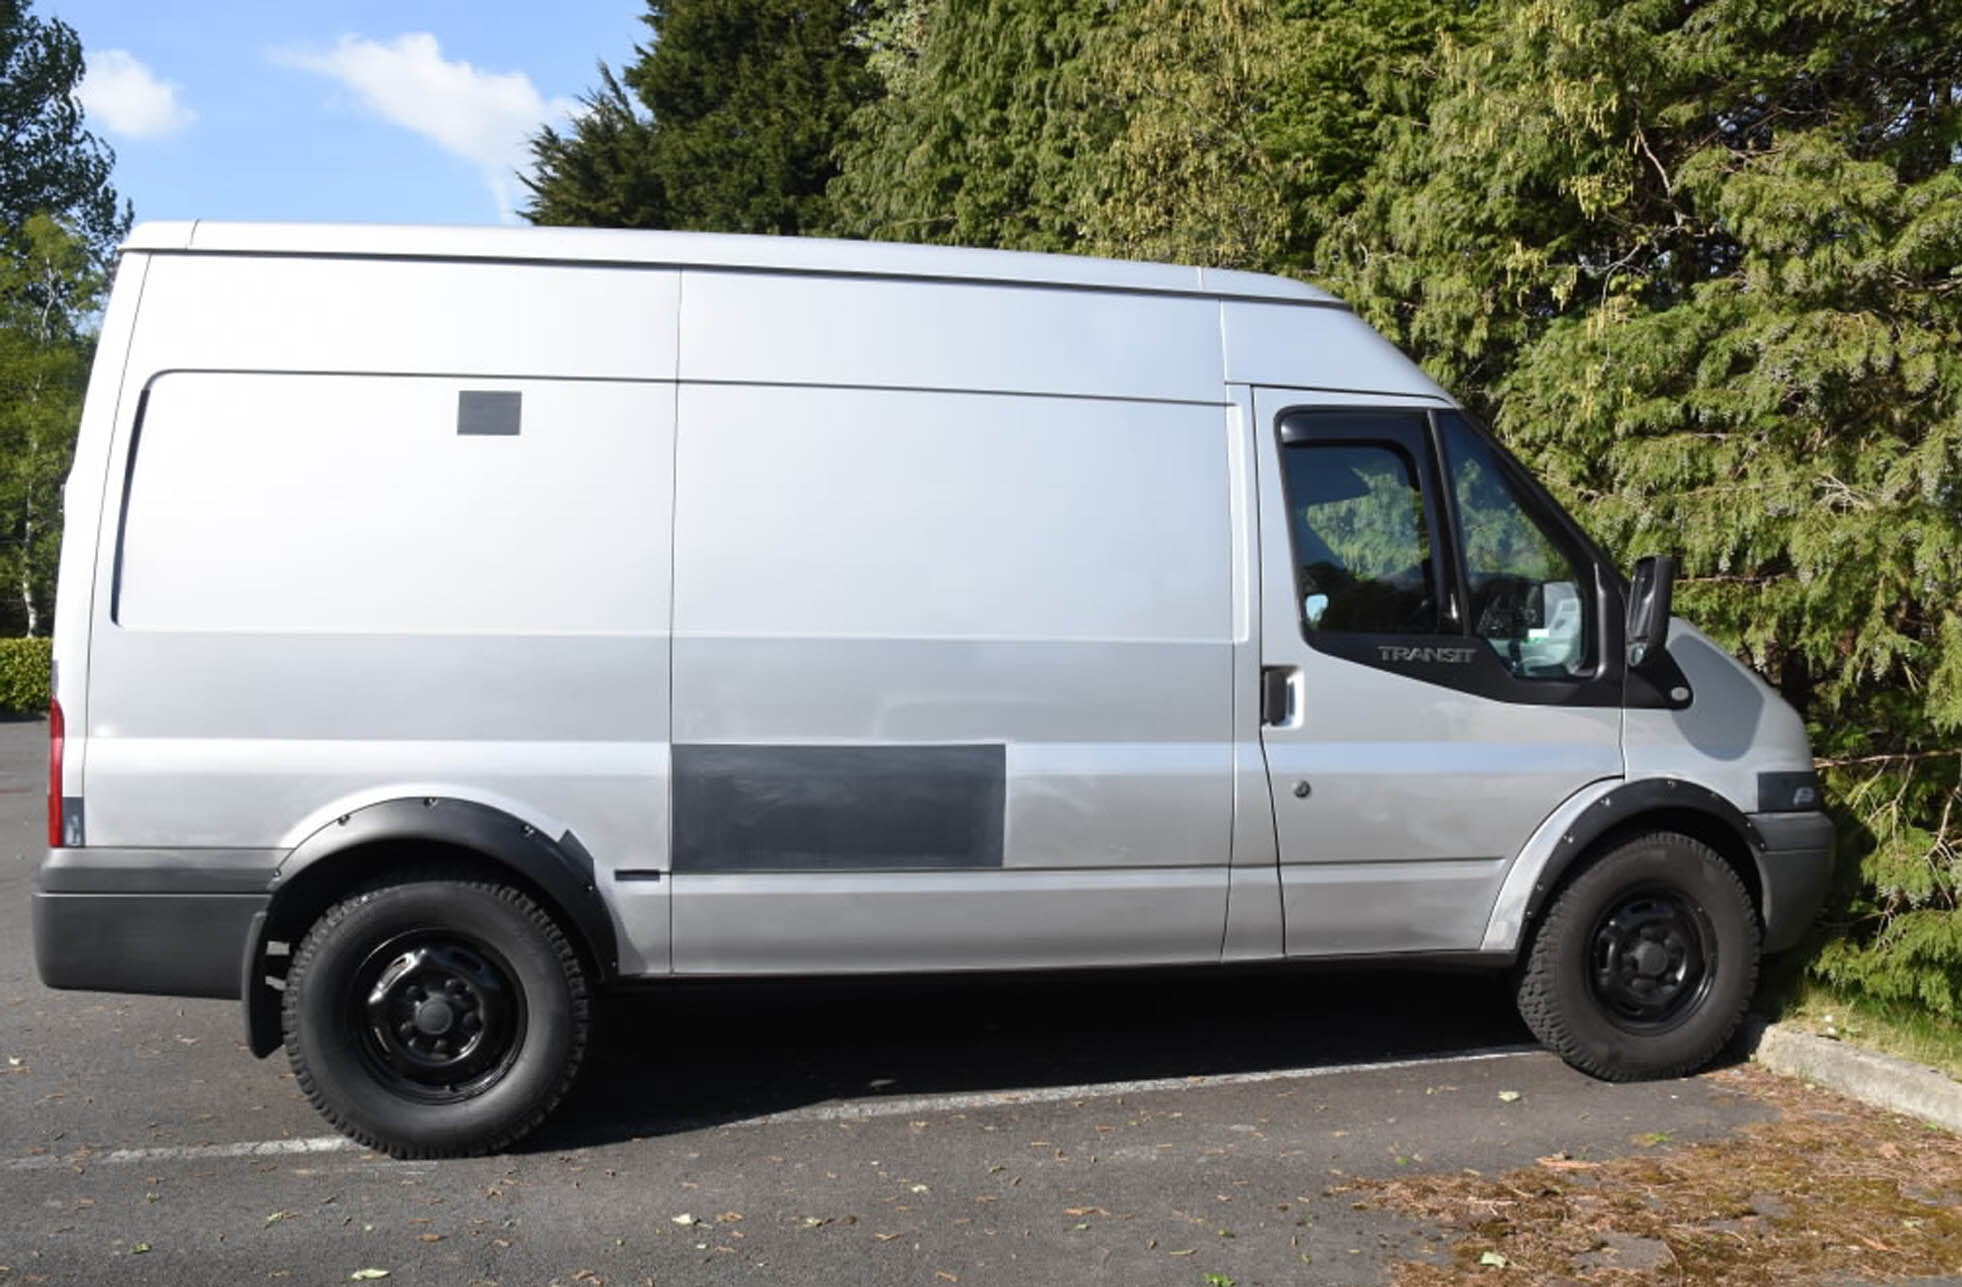 Lancashire Constabulary are asking for information about a silver Ford Transit van, registration MT57 FLC (Lancashire Police/PA)